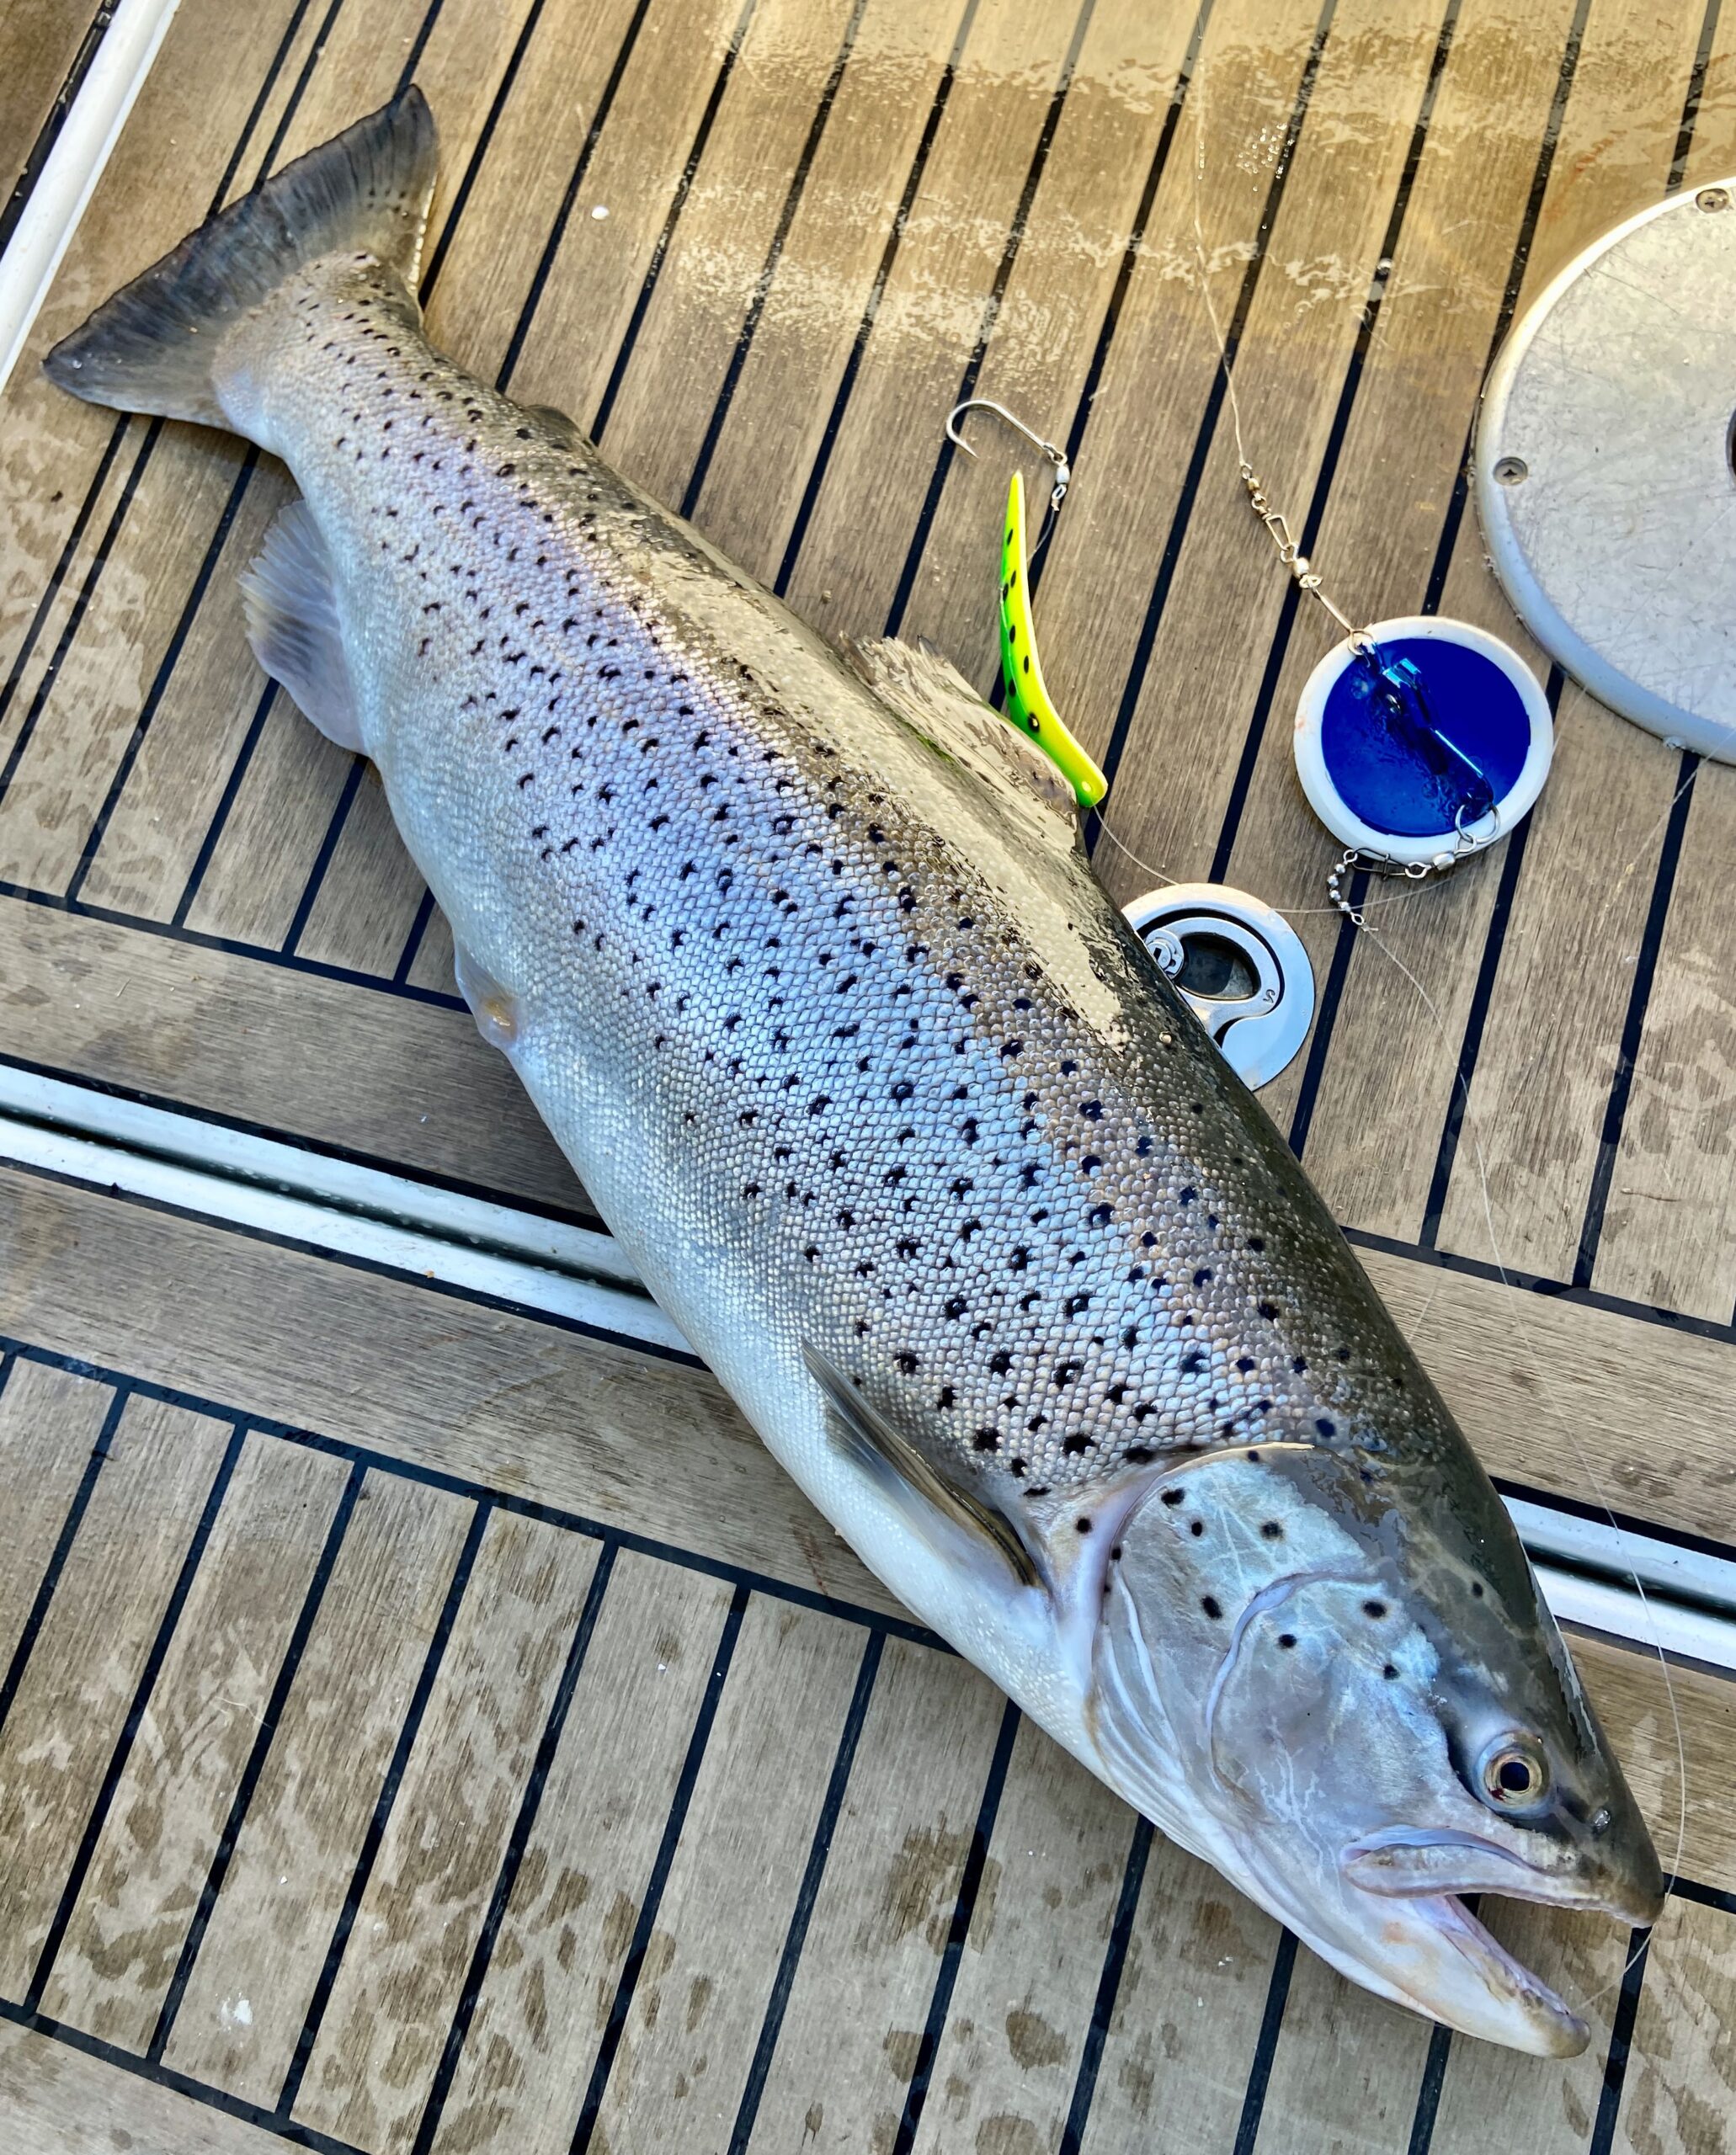 lake trout is a brown trout